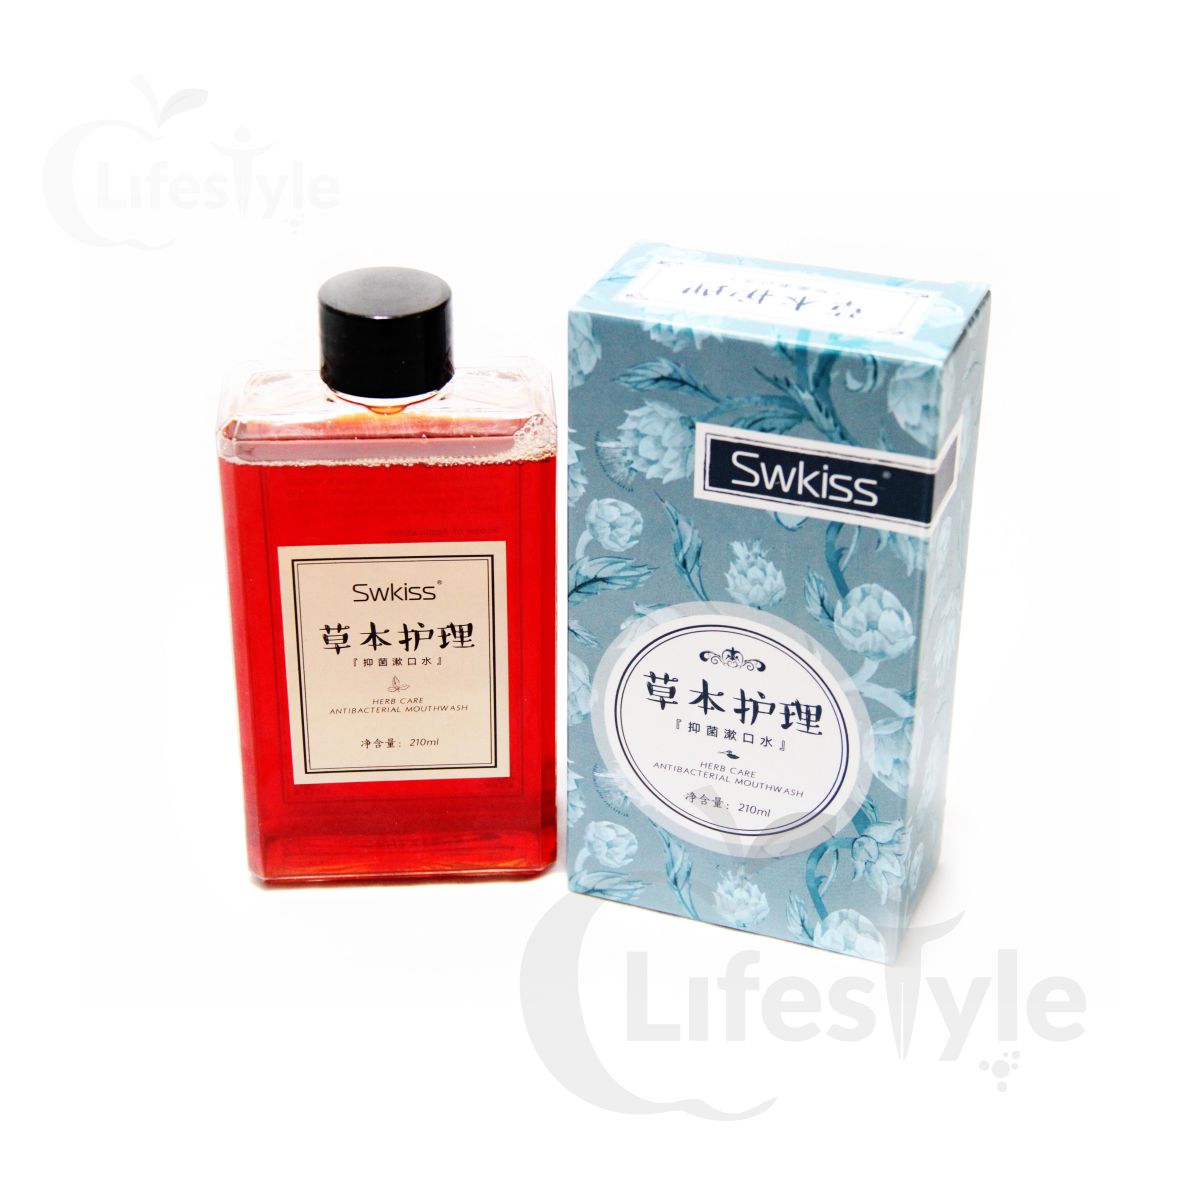 Swkiss Antibacterial Mouthwash (New) classylifestyle.ng